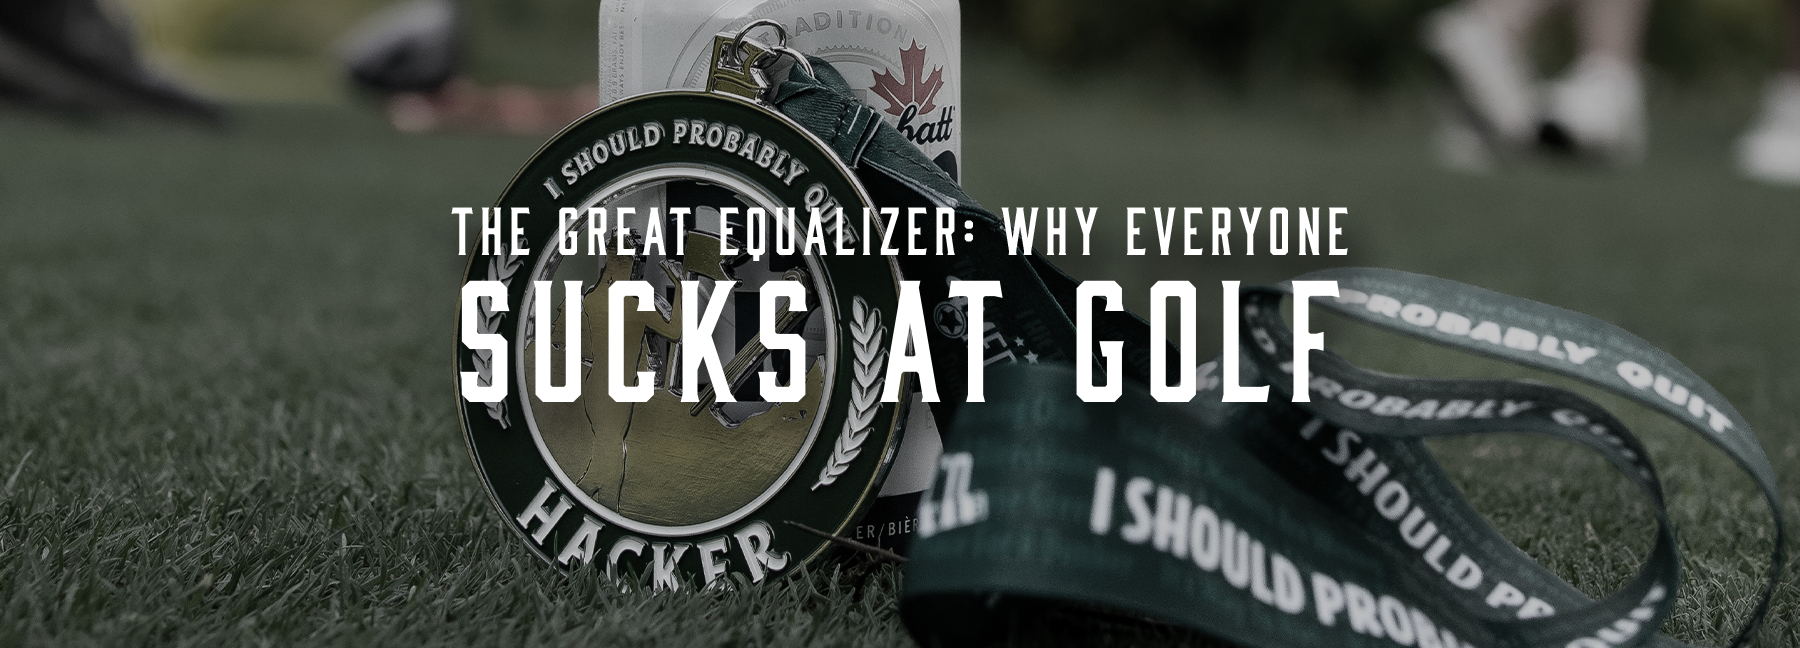 The Great Equalizer: Why Everyone Sucks at Golf